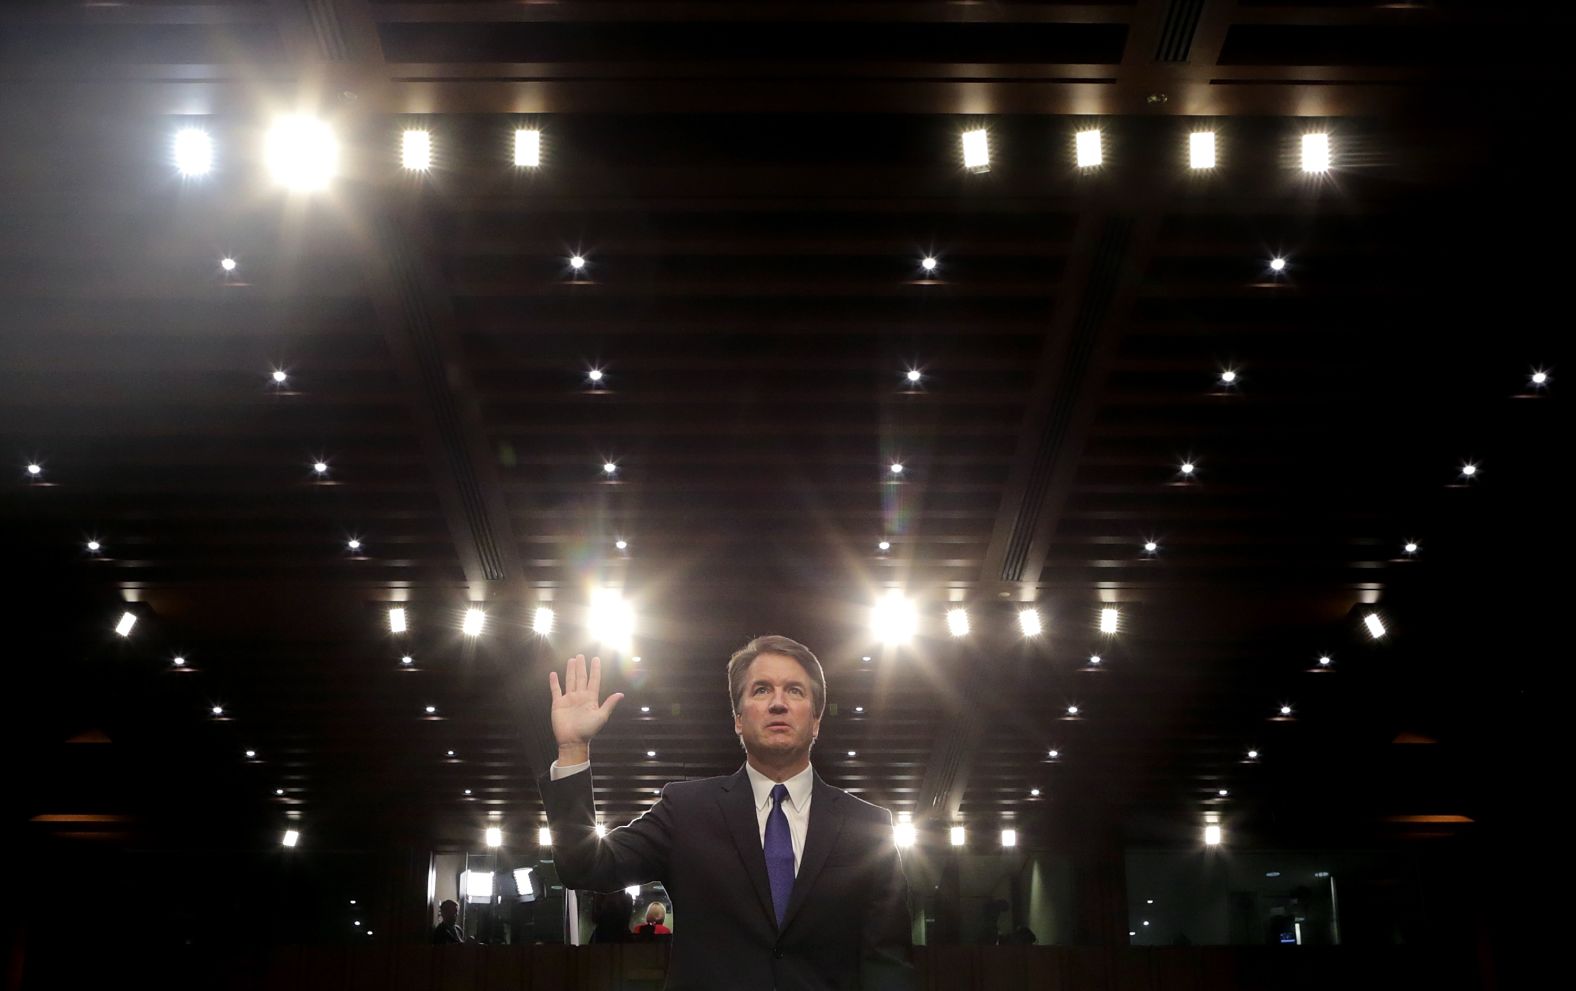 Kavanaugh is sworn in before the Senate Judiciary Committee on Tuesday.